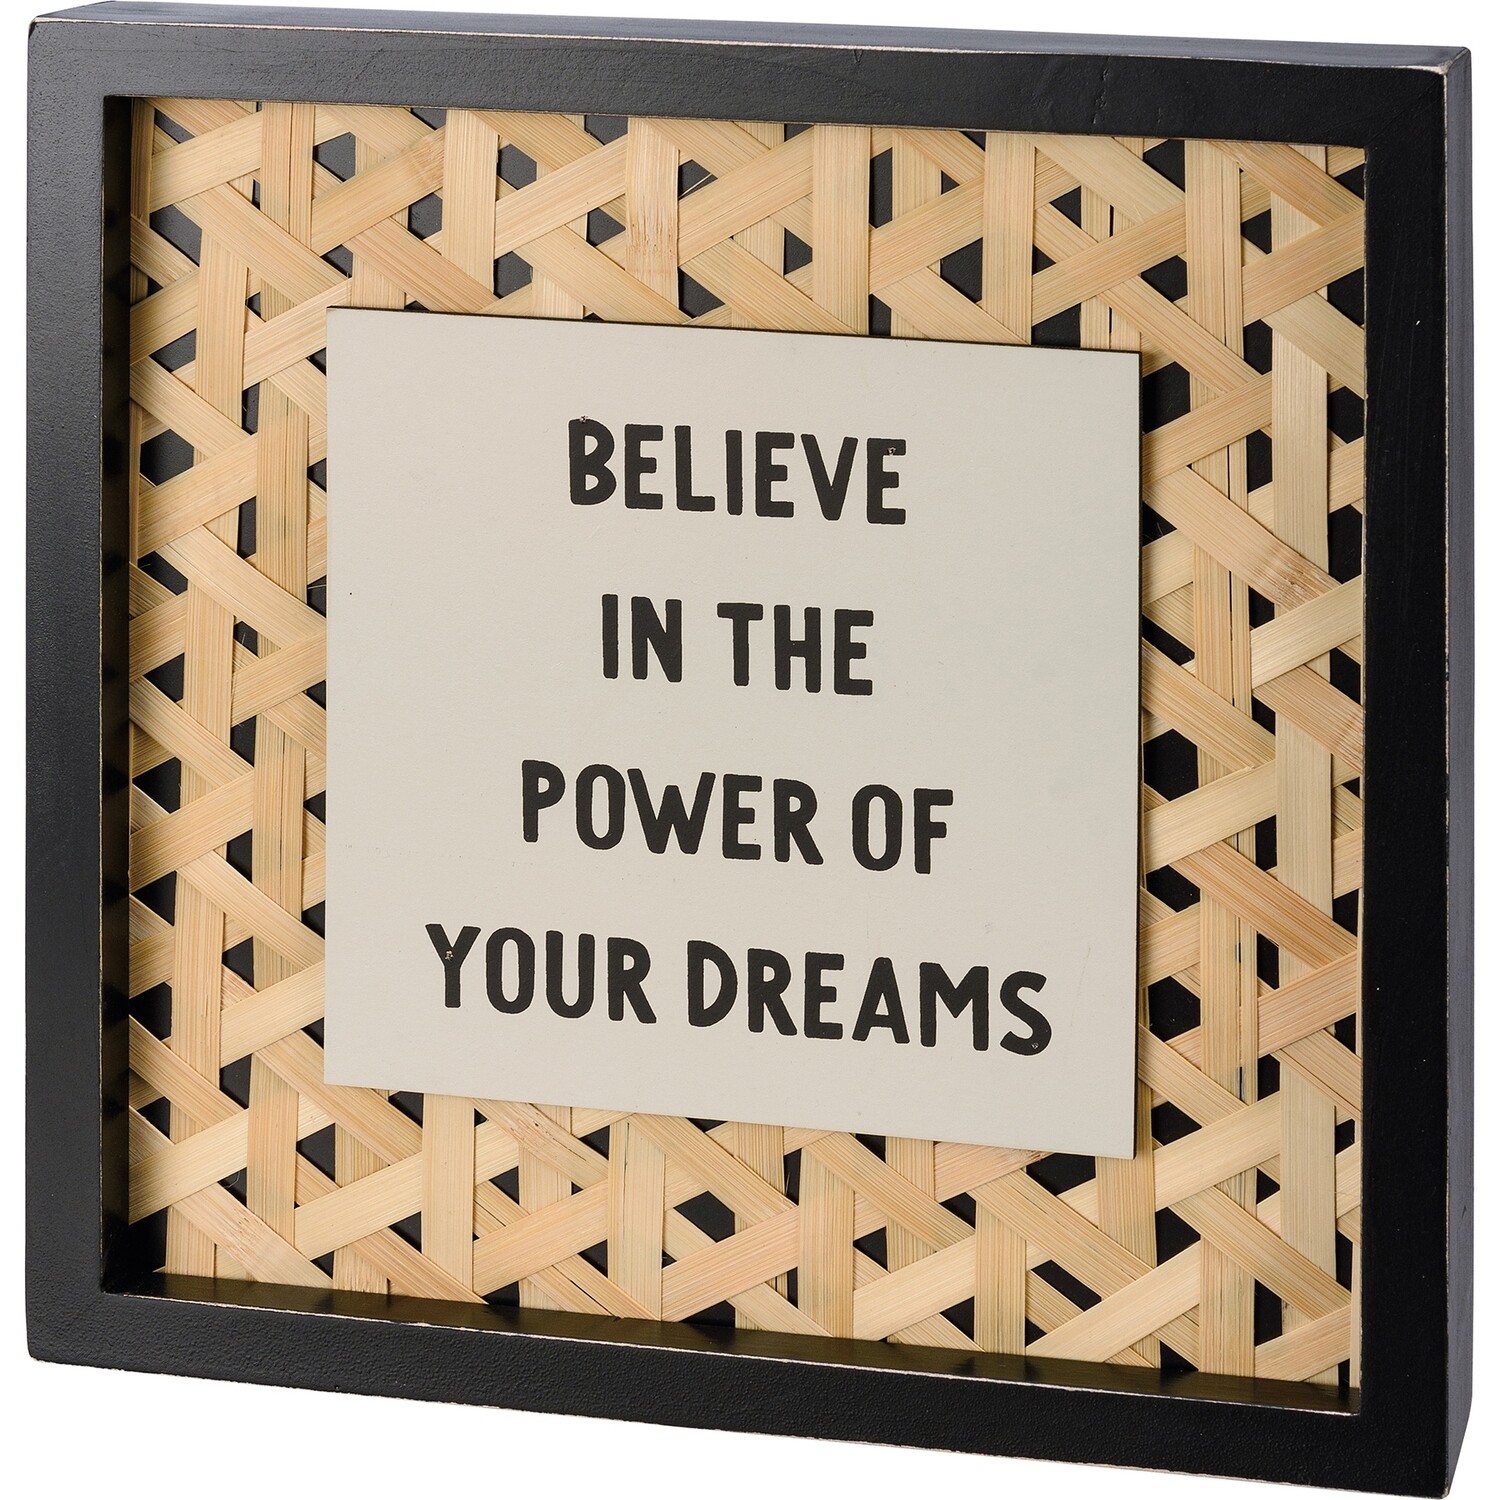 Inset Box Sign - Your Dreams